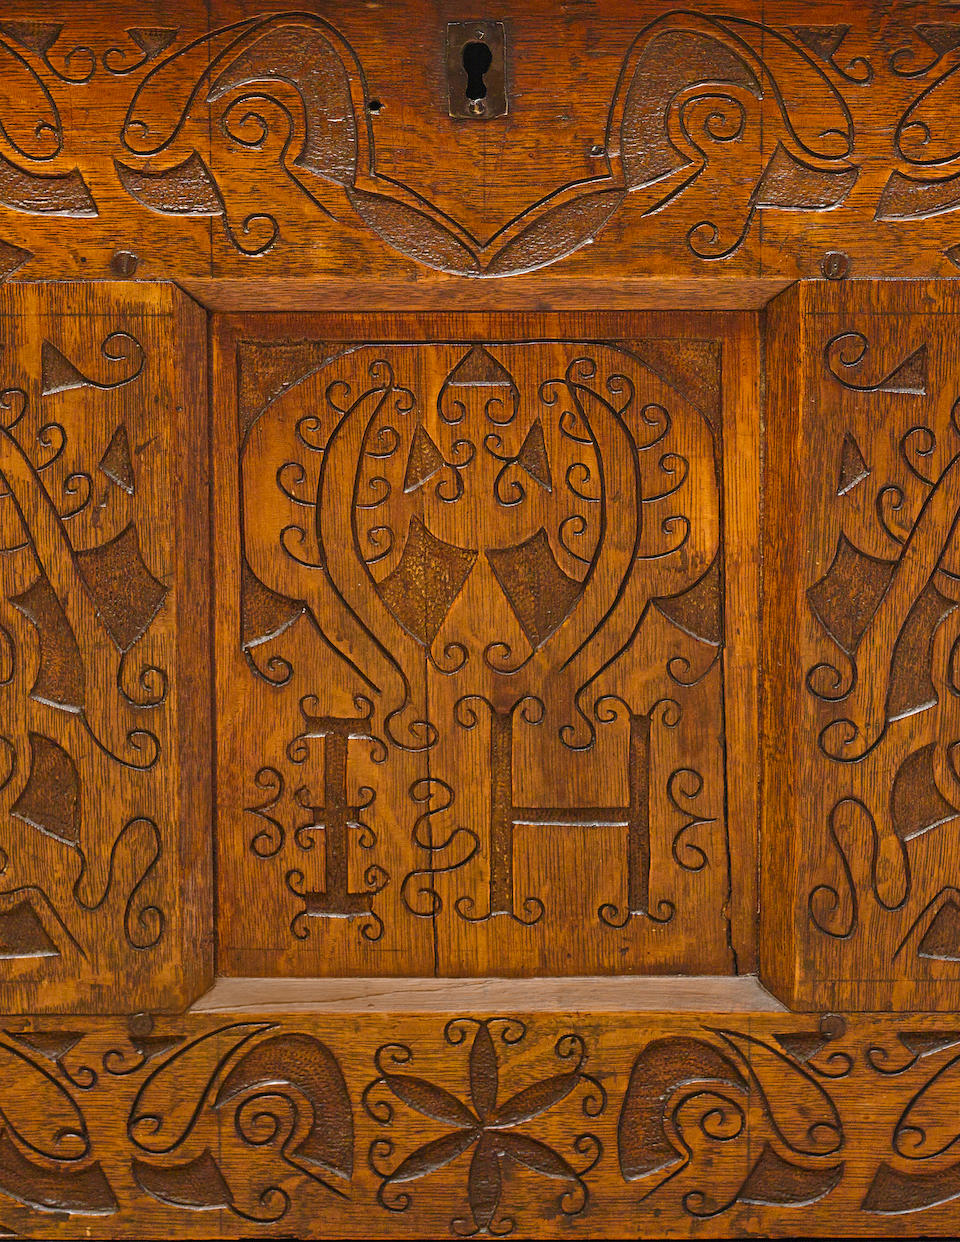 The extraordinary Hovey-Wadsworth Family joined oak and pine "Hadley" chest with single drawer Massachusetts early 18th century